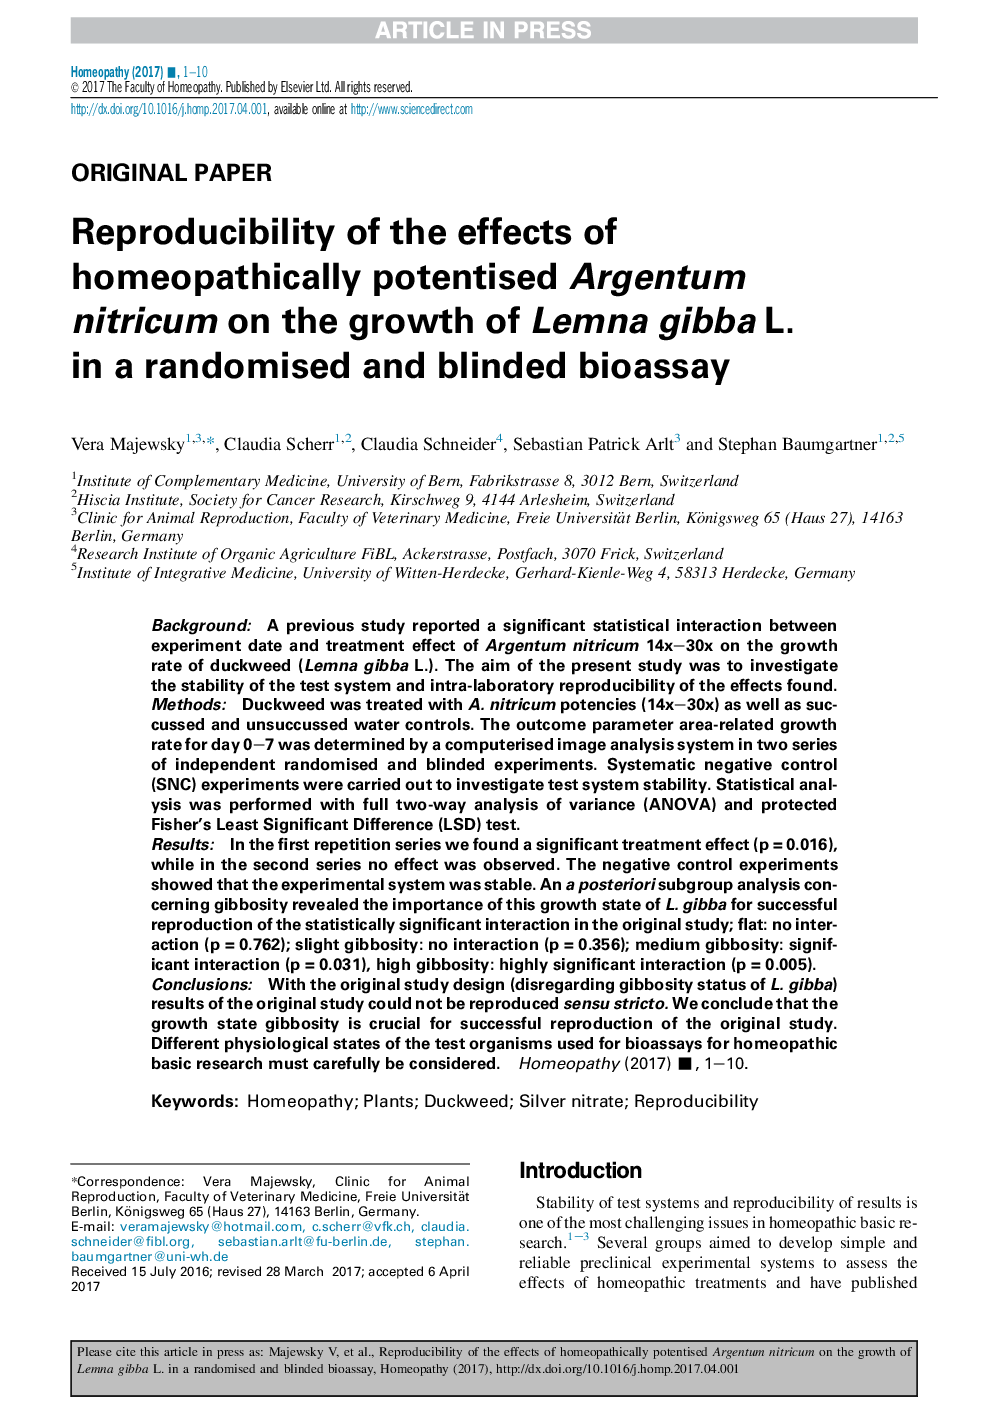 Reproducibility of the effects of homeopathically potentised Argentum nitricum on the growth of Lemna gibba L. in a randomised and blinded bioassay